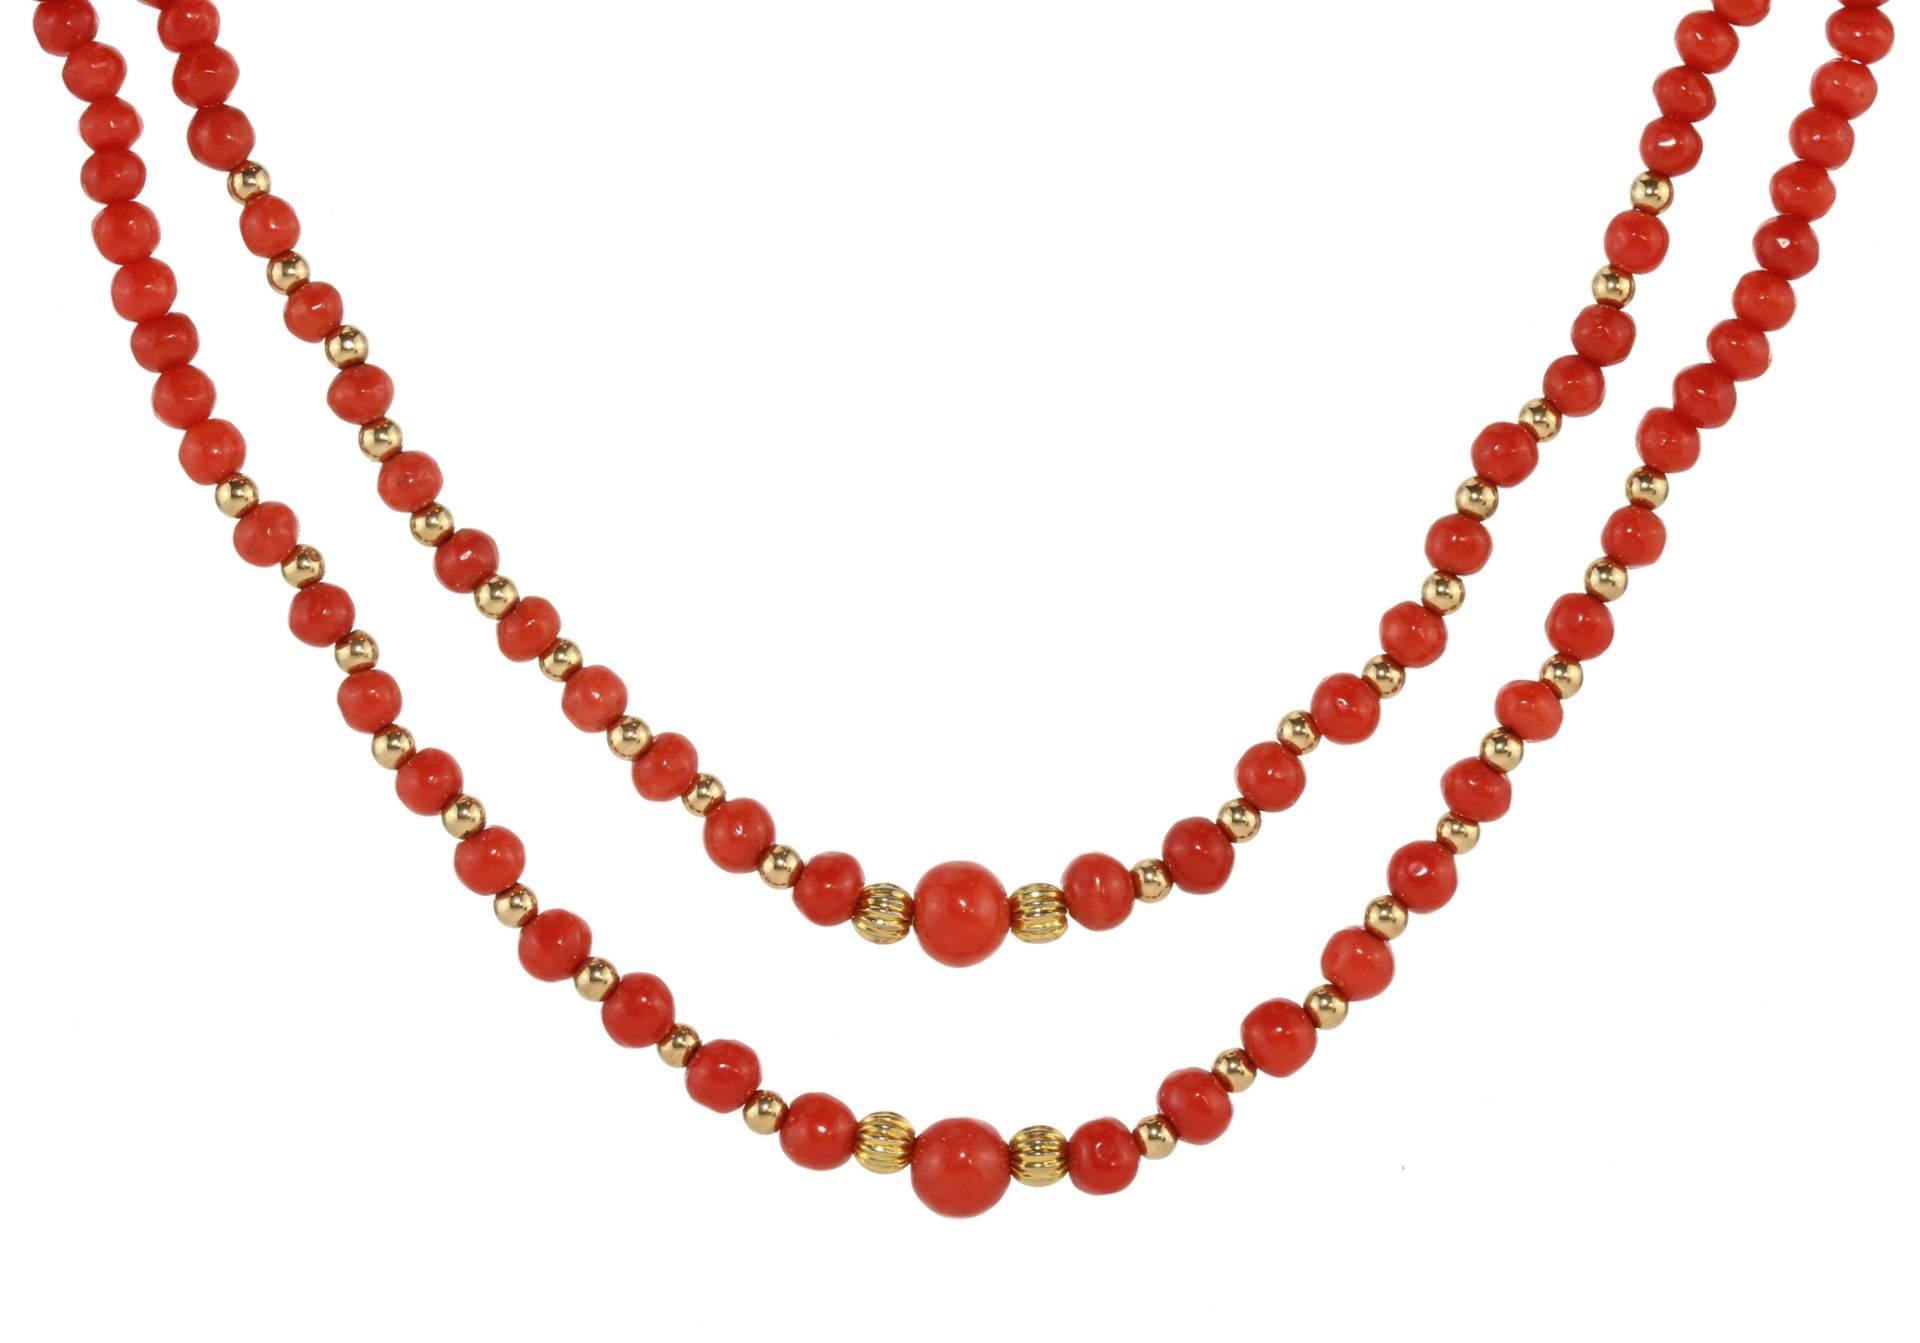 A double row coral and gold bead necklace in yellow gold designed as two rows of two hundred and